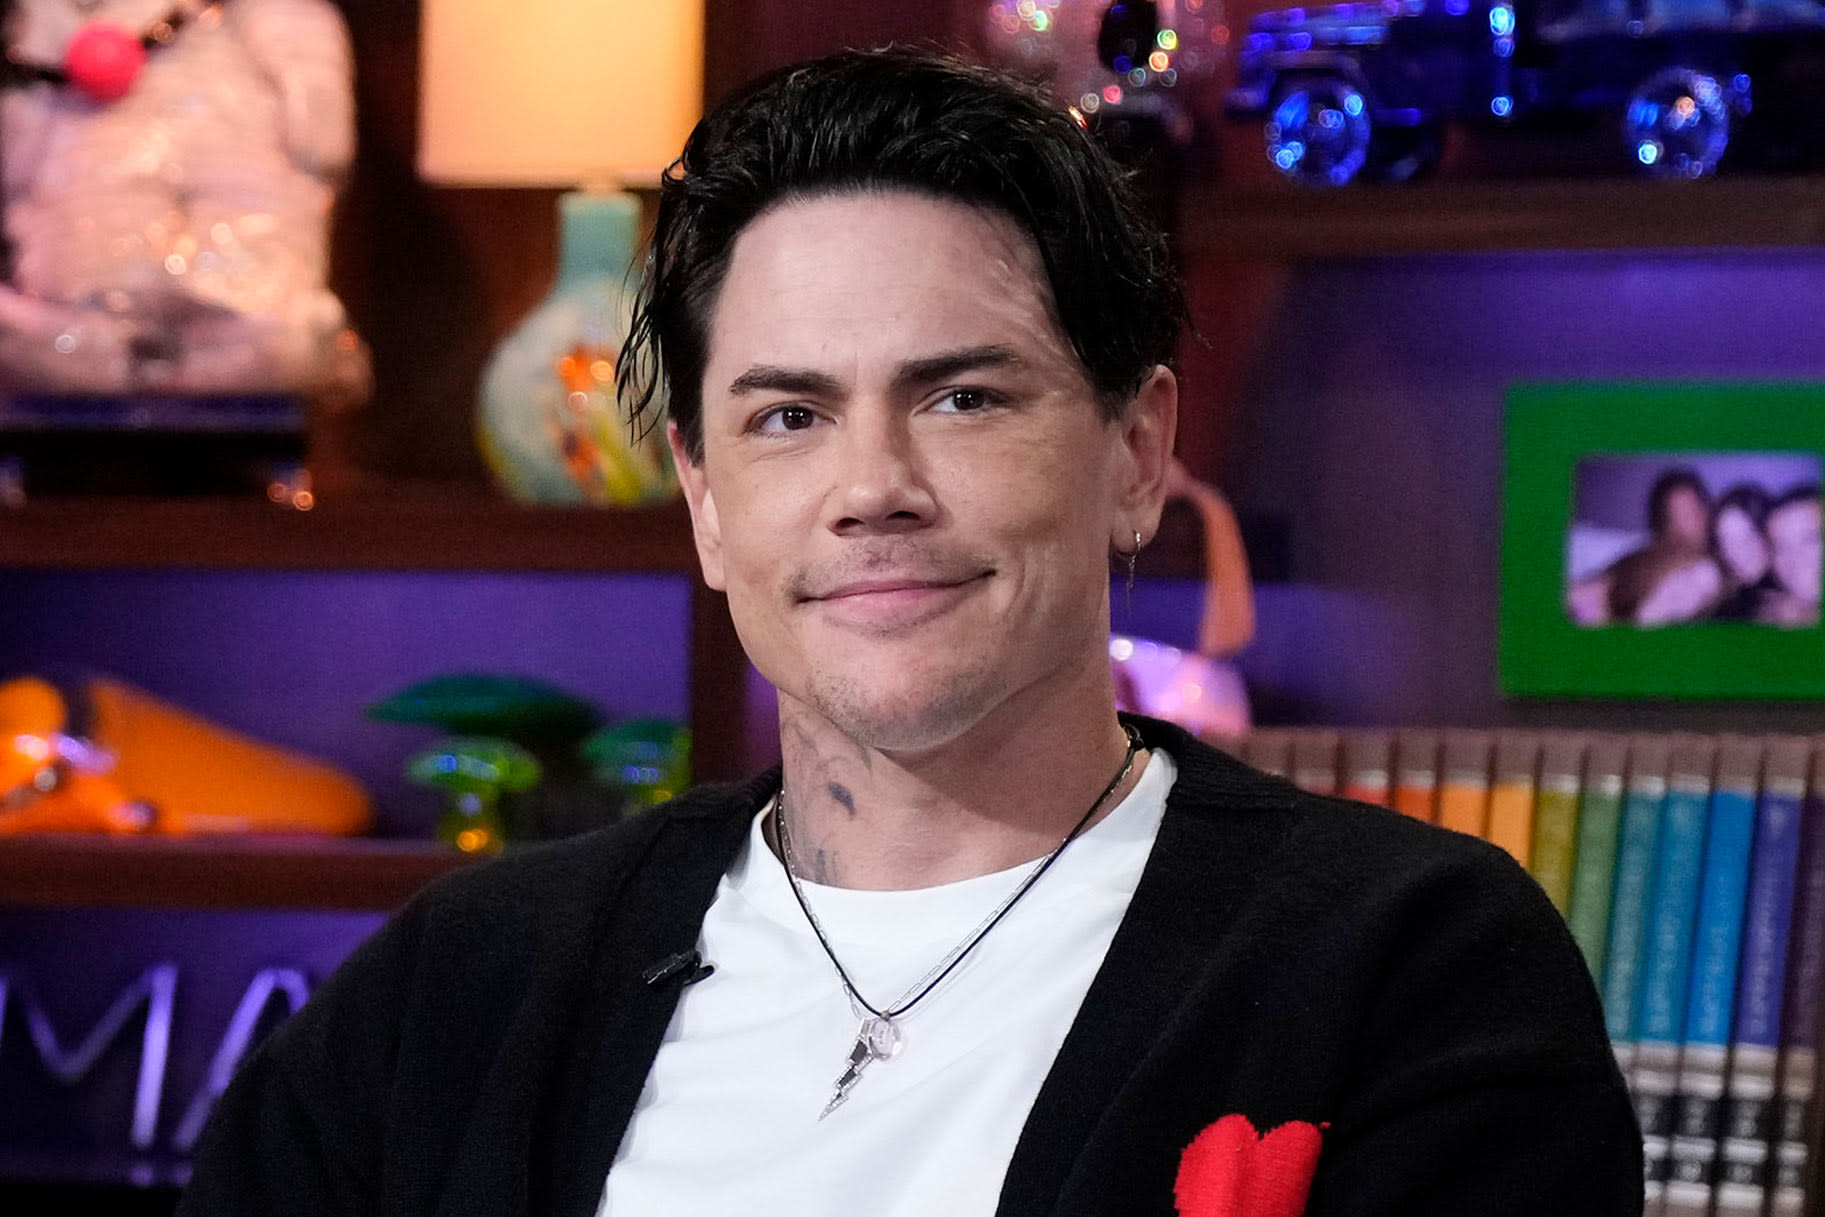 Tom Sandoval Clarifies His Hot Mic Moment on the VPR Finale: "What I Meant Was..." | Bravo TV Official Site